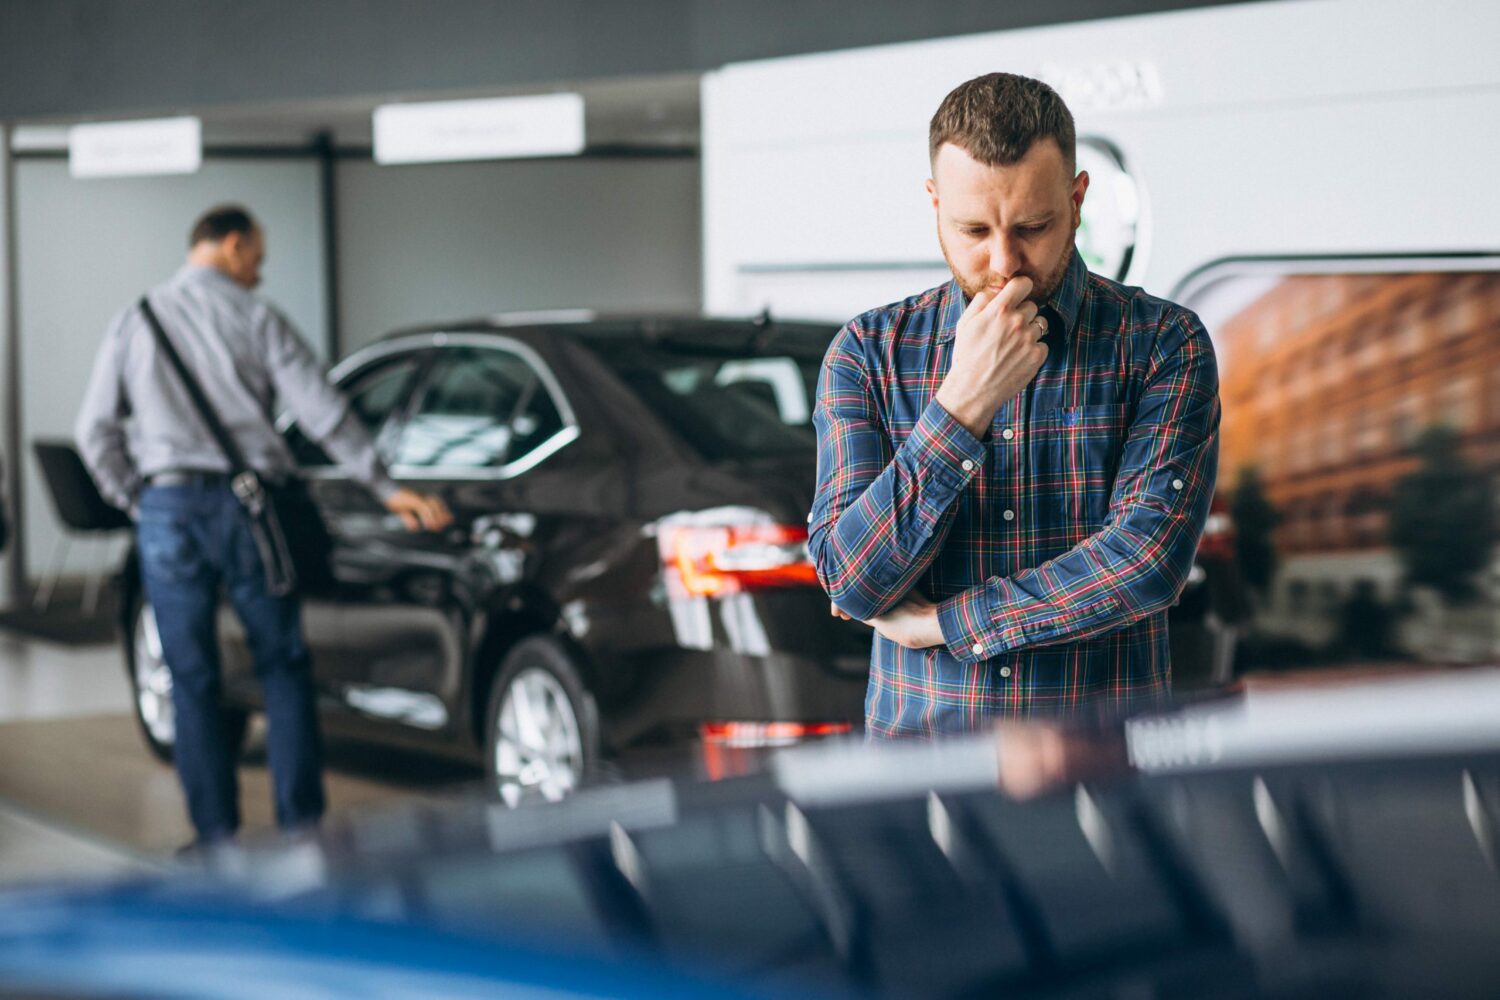 The declining brand loyalty statistics are more than numbers; they reflect profound shifts and challenges within the automotive industry.